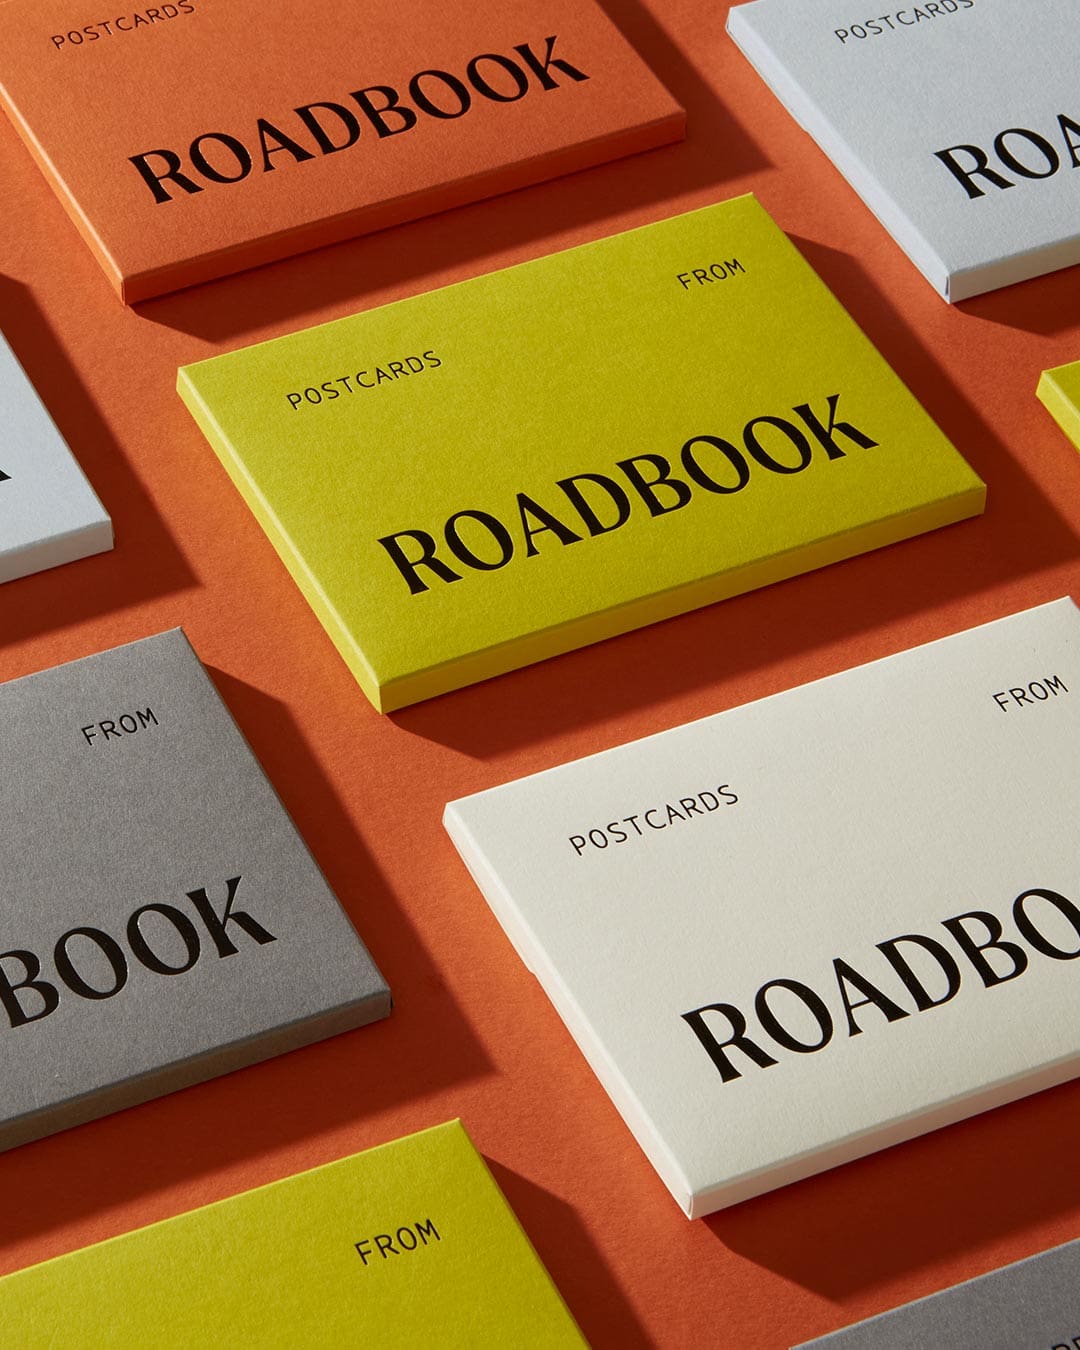 Postcards from ROADBOOK | Brightly coloured boxes in orange, green, white and grey emblazoned with the words ROADBOOK sit against an orange background